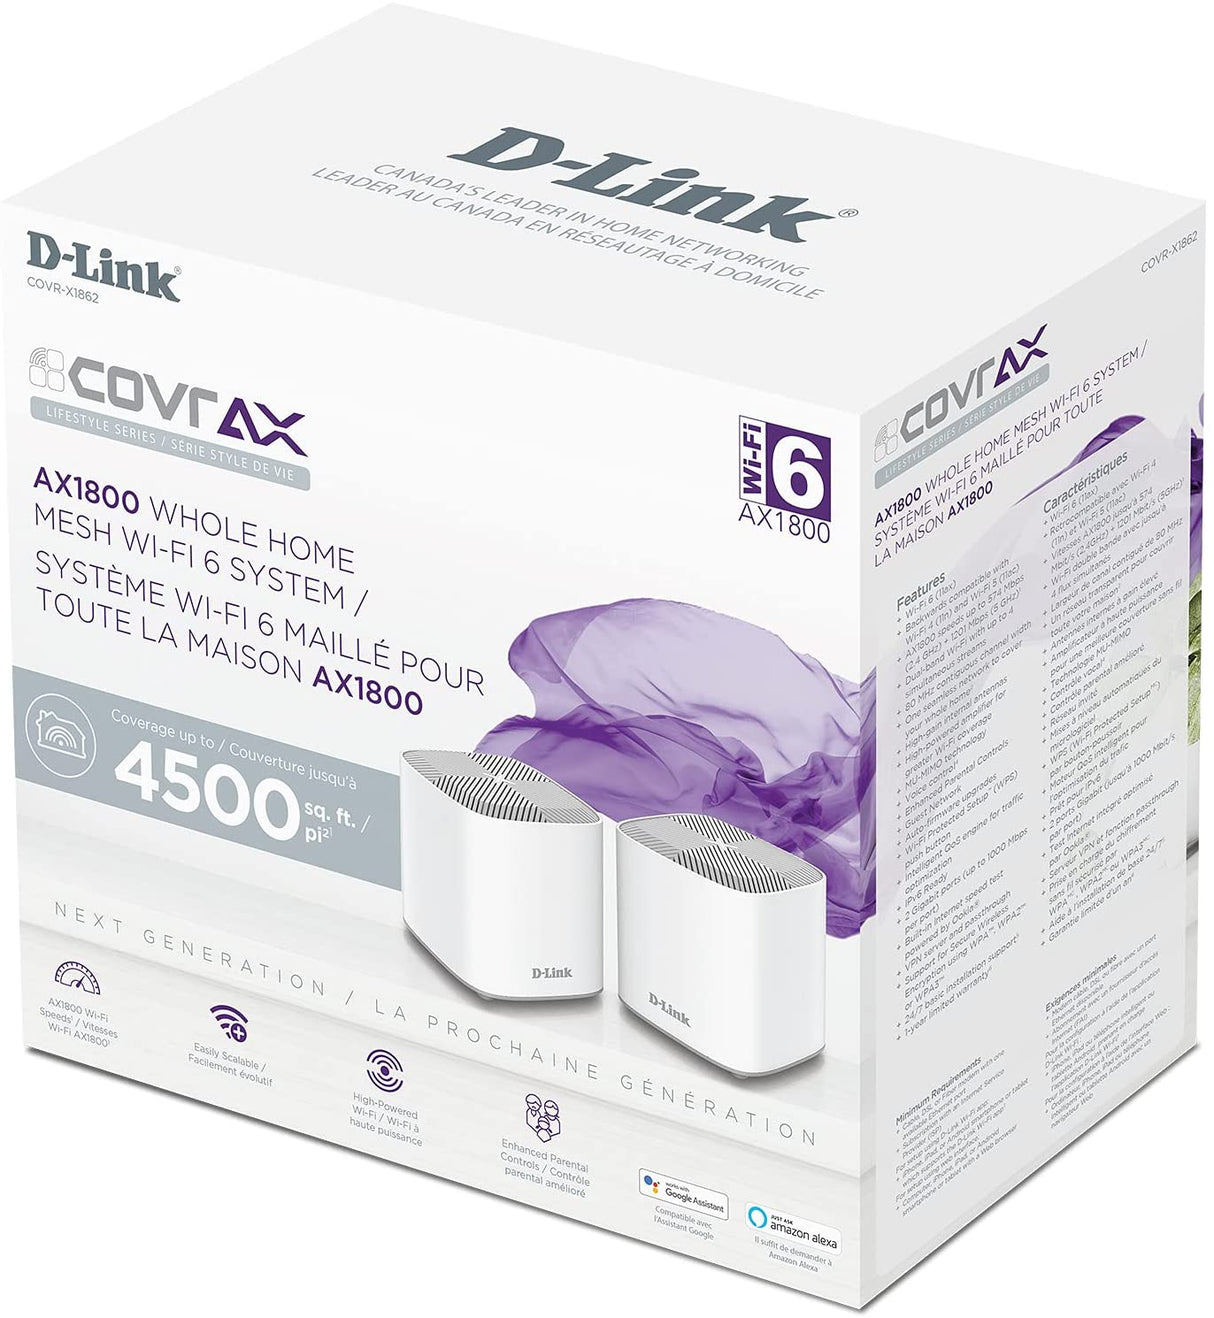 D-Link COVR AX1800 Whole Home Mesh Wi-Fi 6 System - Up to 4500 sq.ft. Coverage, Voice Control w/Amazon Alexa and Google Assistant, Enhanced Parental Controls, 2-Pack (COVR-X1862) WiFi 6 AX1800 Mesh Kit 2pk